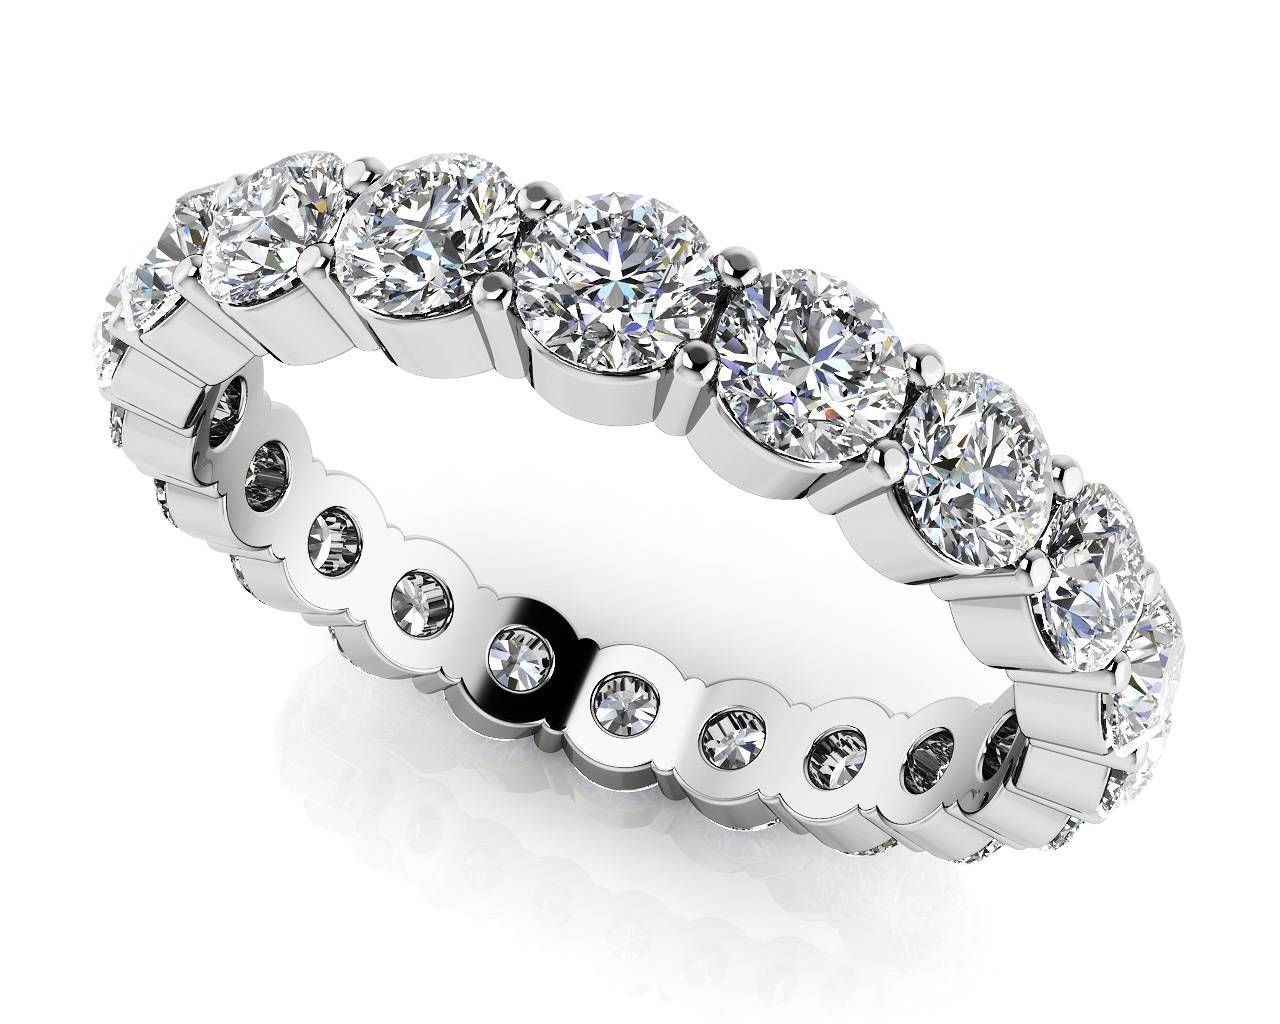 Design Your Own Diamond Anniversary Ring & Eternity Ring Regarding Most Current Custom Anniversary Rings (View 6 of 25)